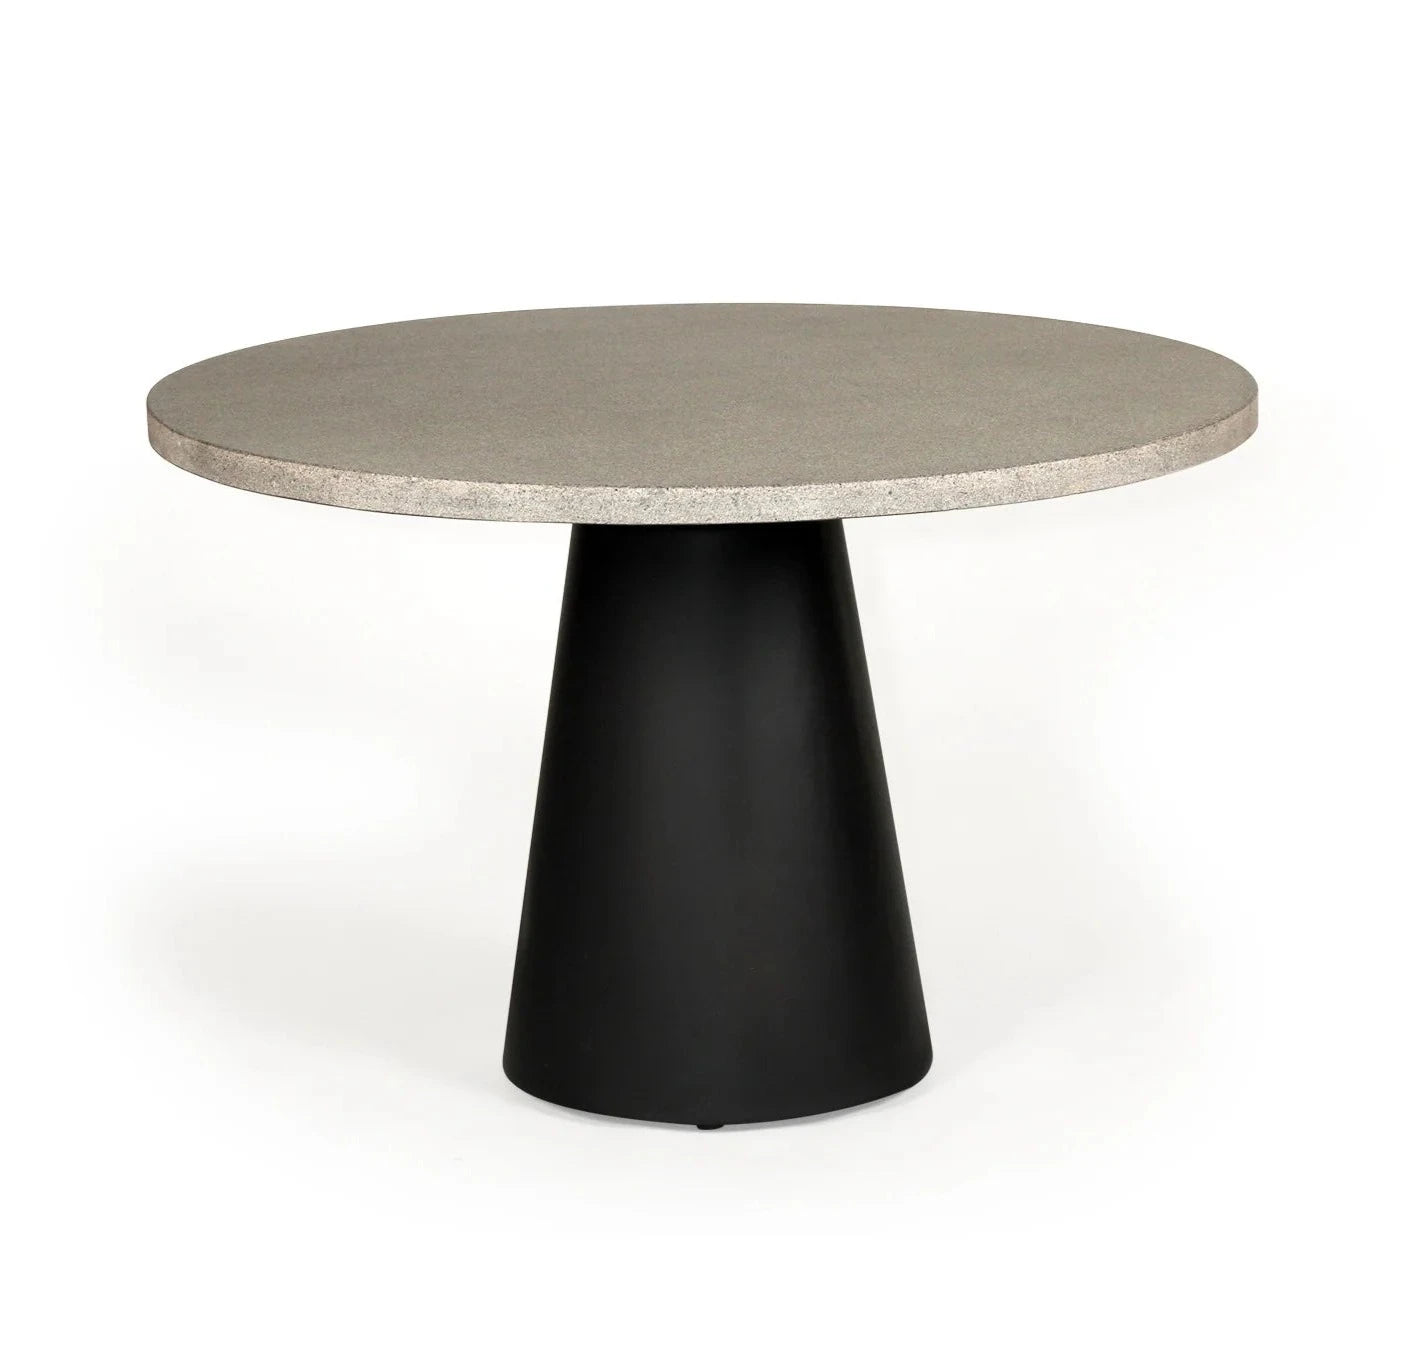 Avalon Round Dining Table - Beach with Black Metal Cone Base